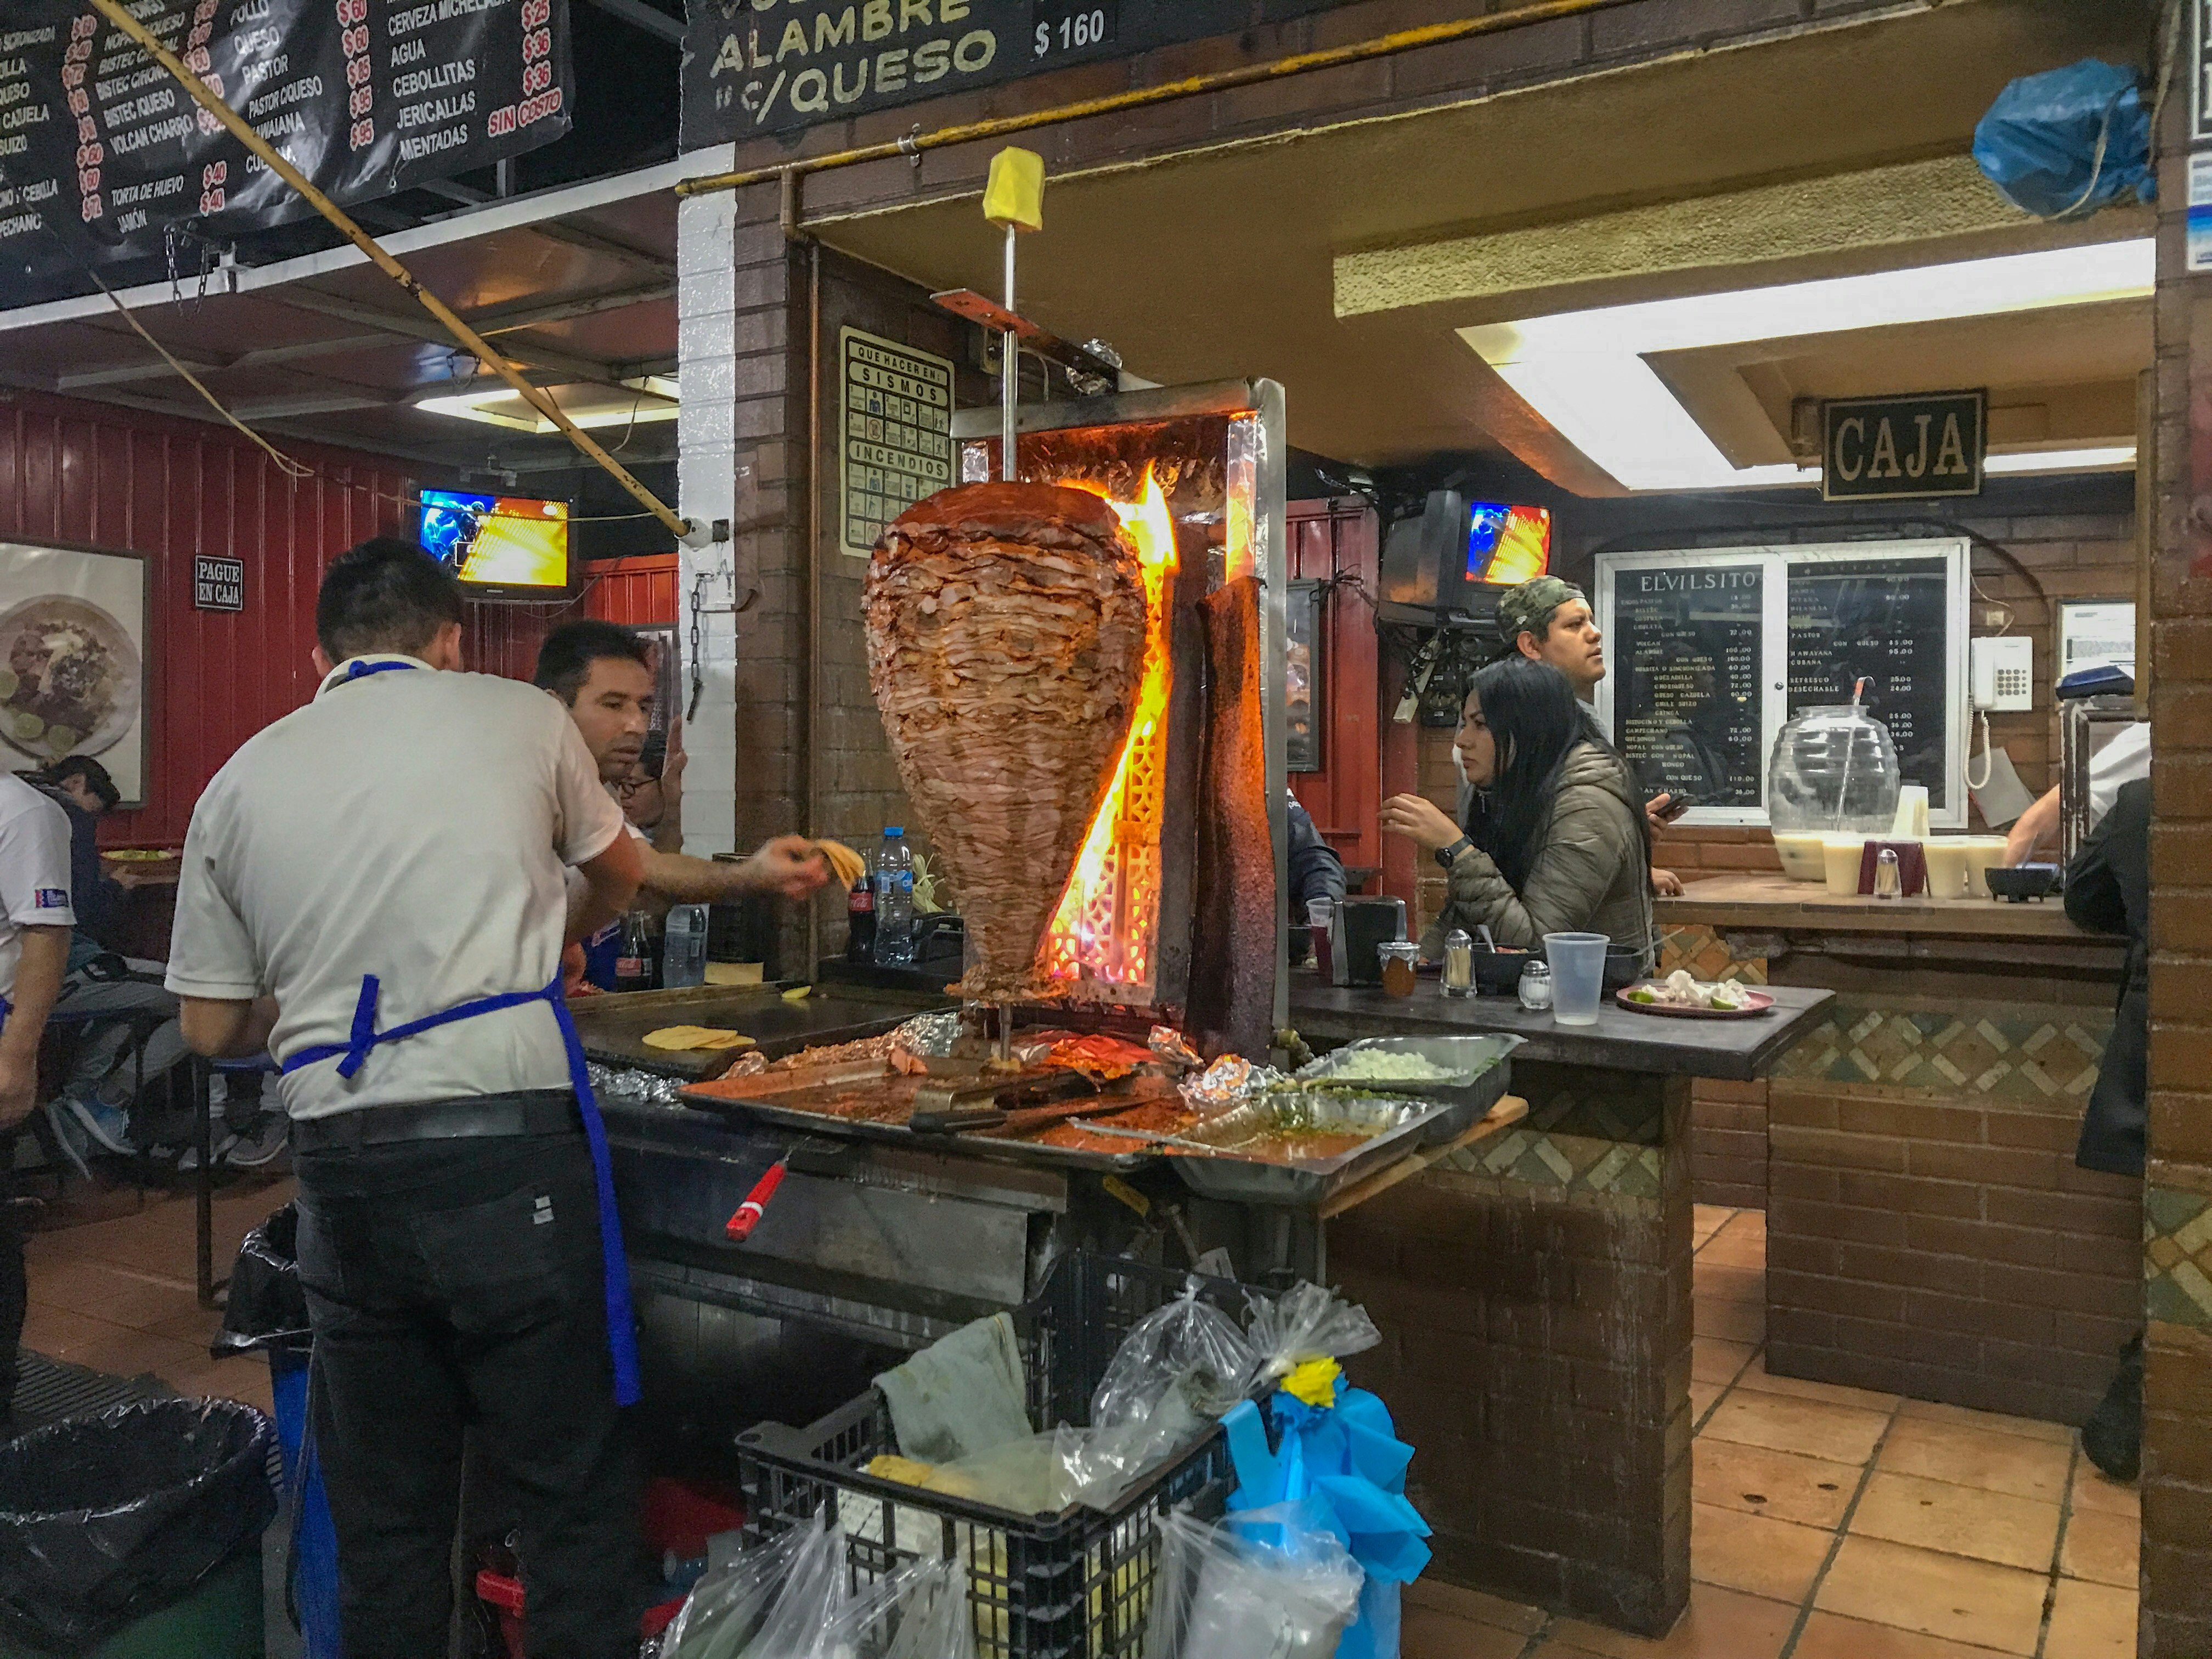 A large chunk of meat is being roasted on a large spit as a man prepares taco shells on a large grill as another man looks on. There are a group of people eating in the background. 